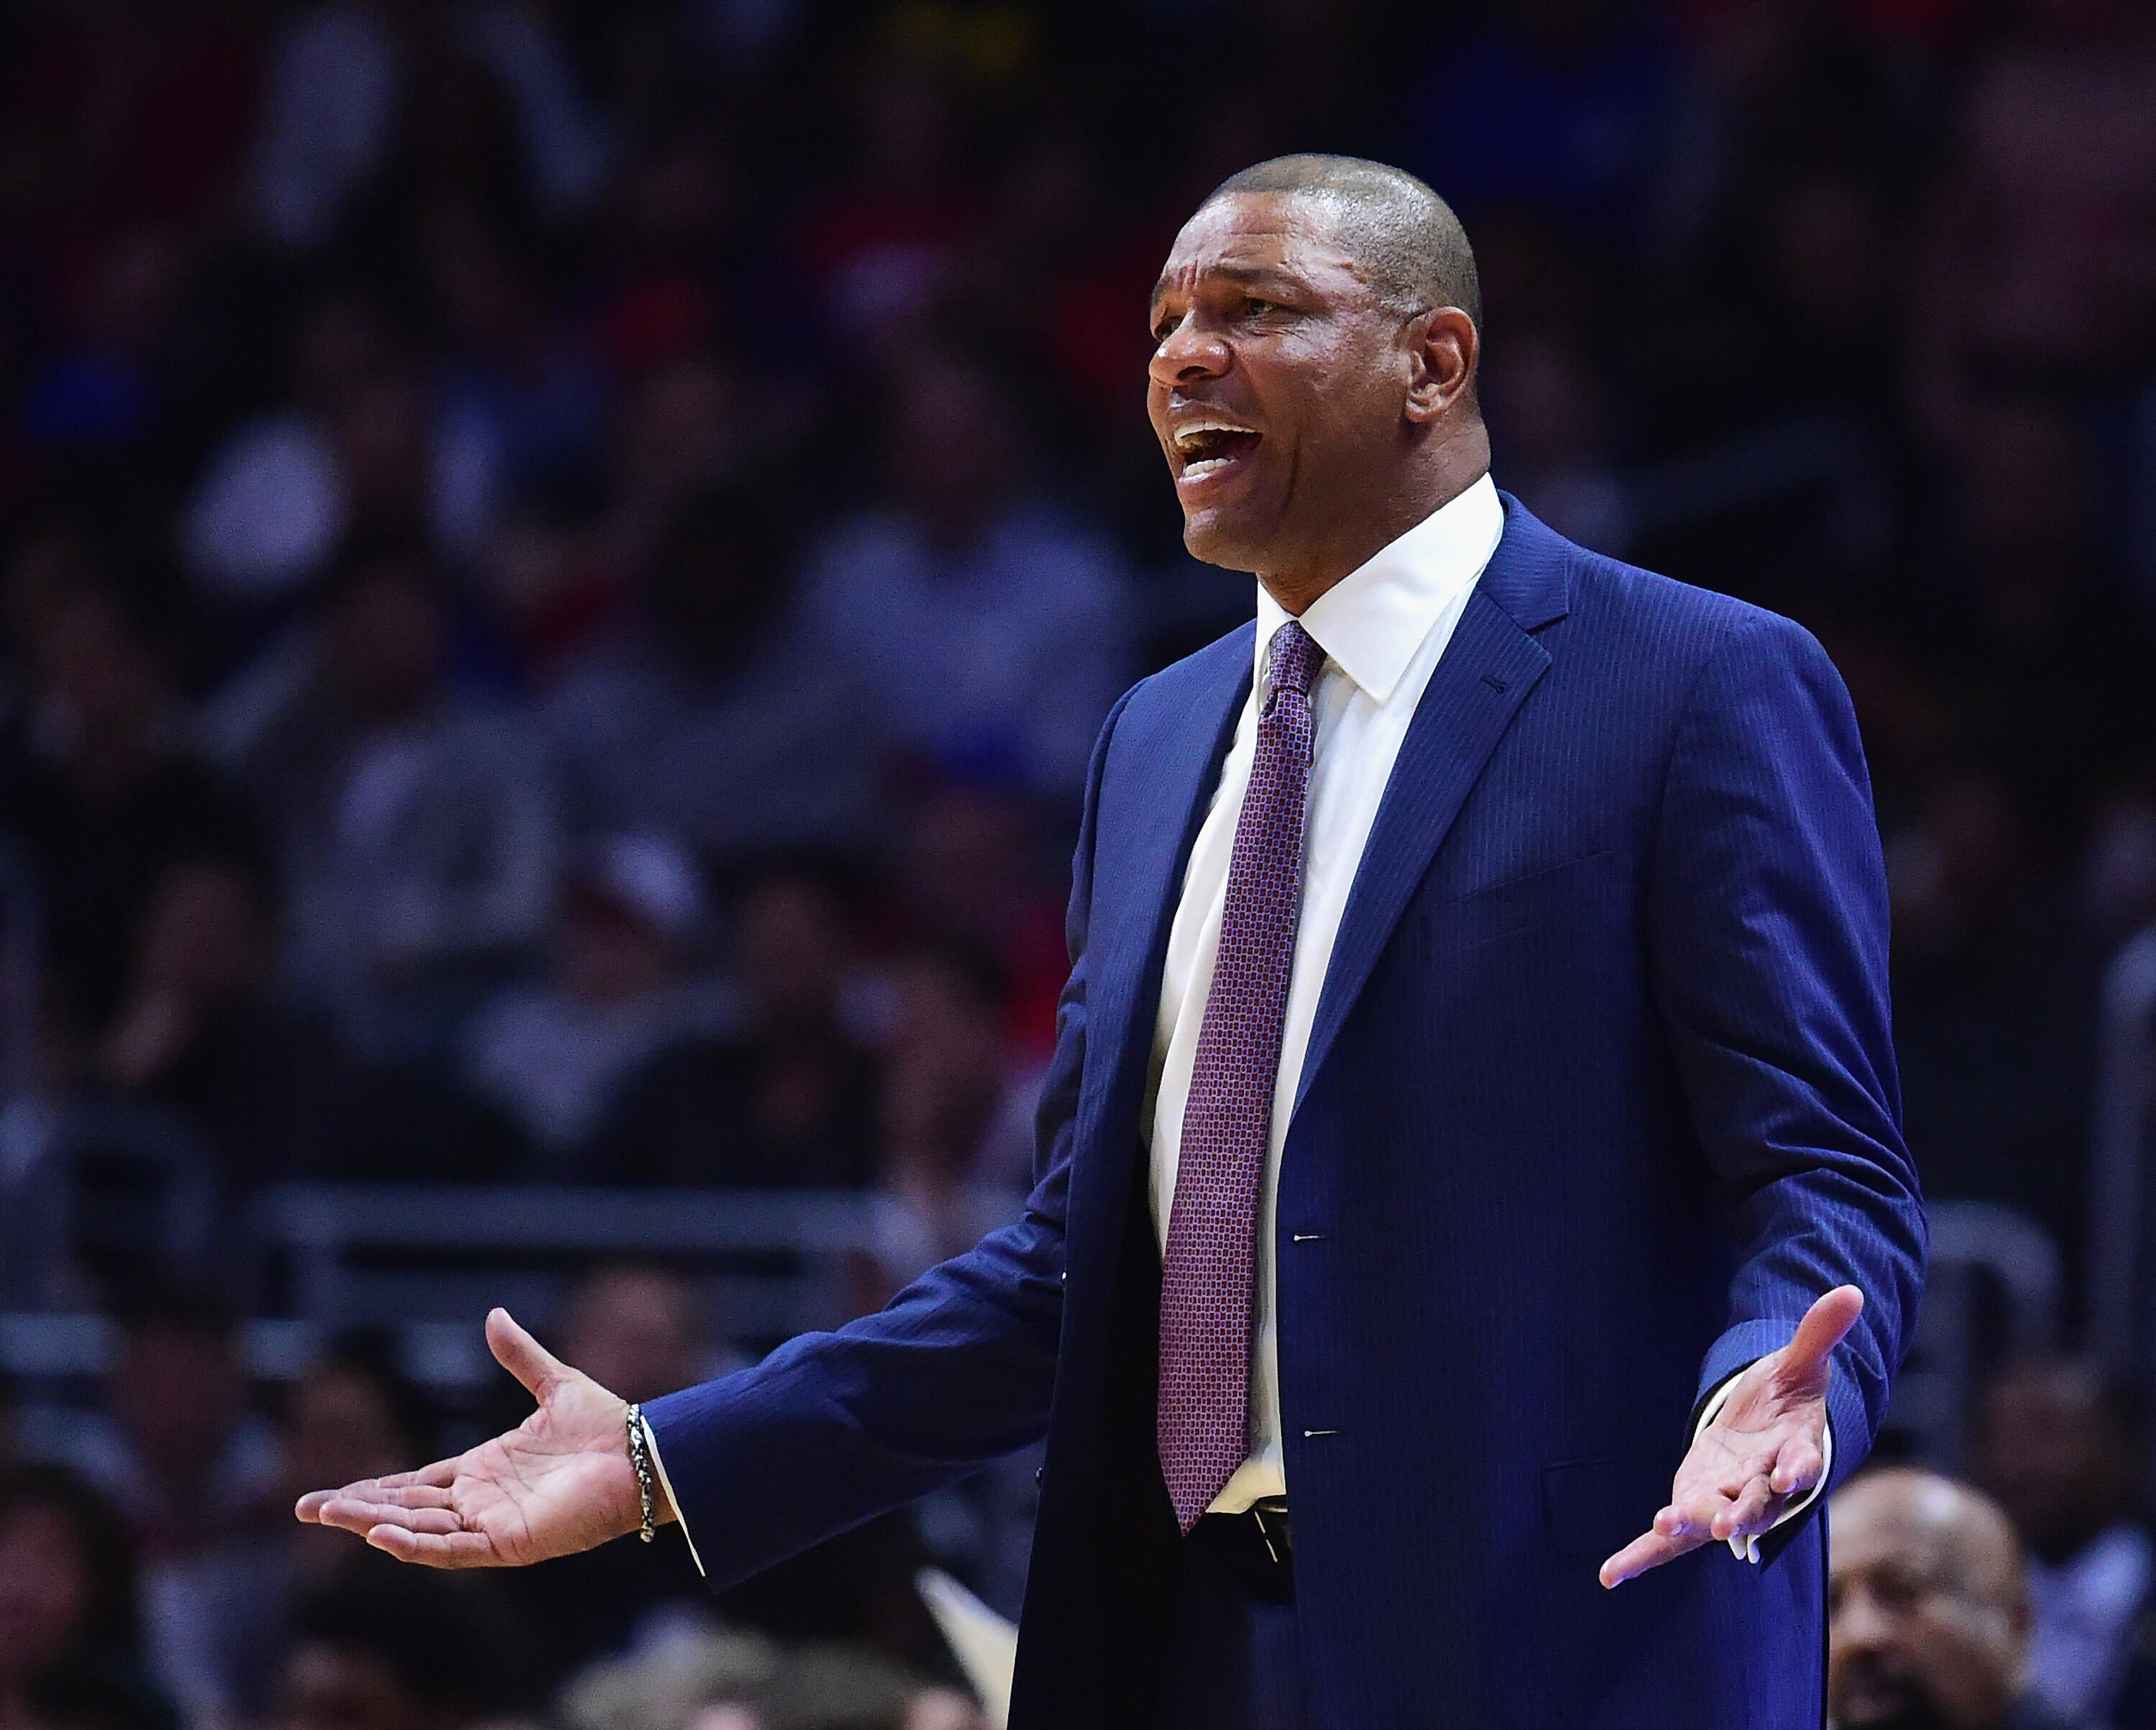 LOS ANGELES, CA - MARCH 29:  Doc Rivers of the LA Clippers reacts to a call during a 133-124 Clipper win over the Washington Wizards at Staples Center on March 29, 2017 in Los Angeles, California.  NOTE TO USER: User expressly acknowledges and agrees that